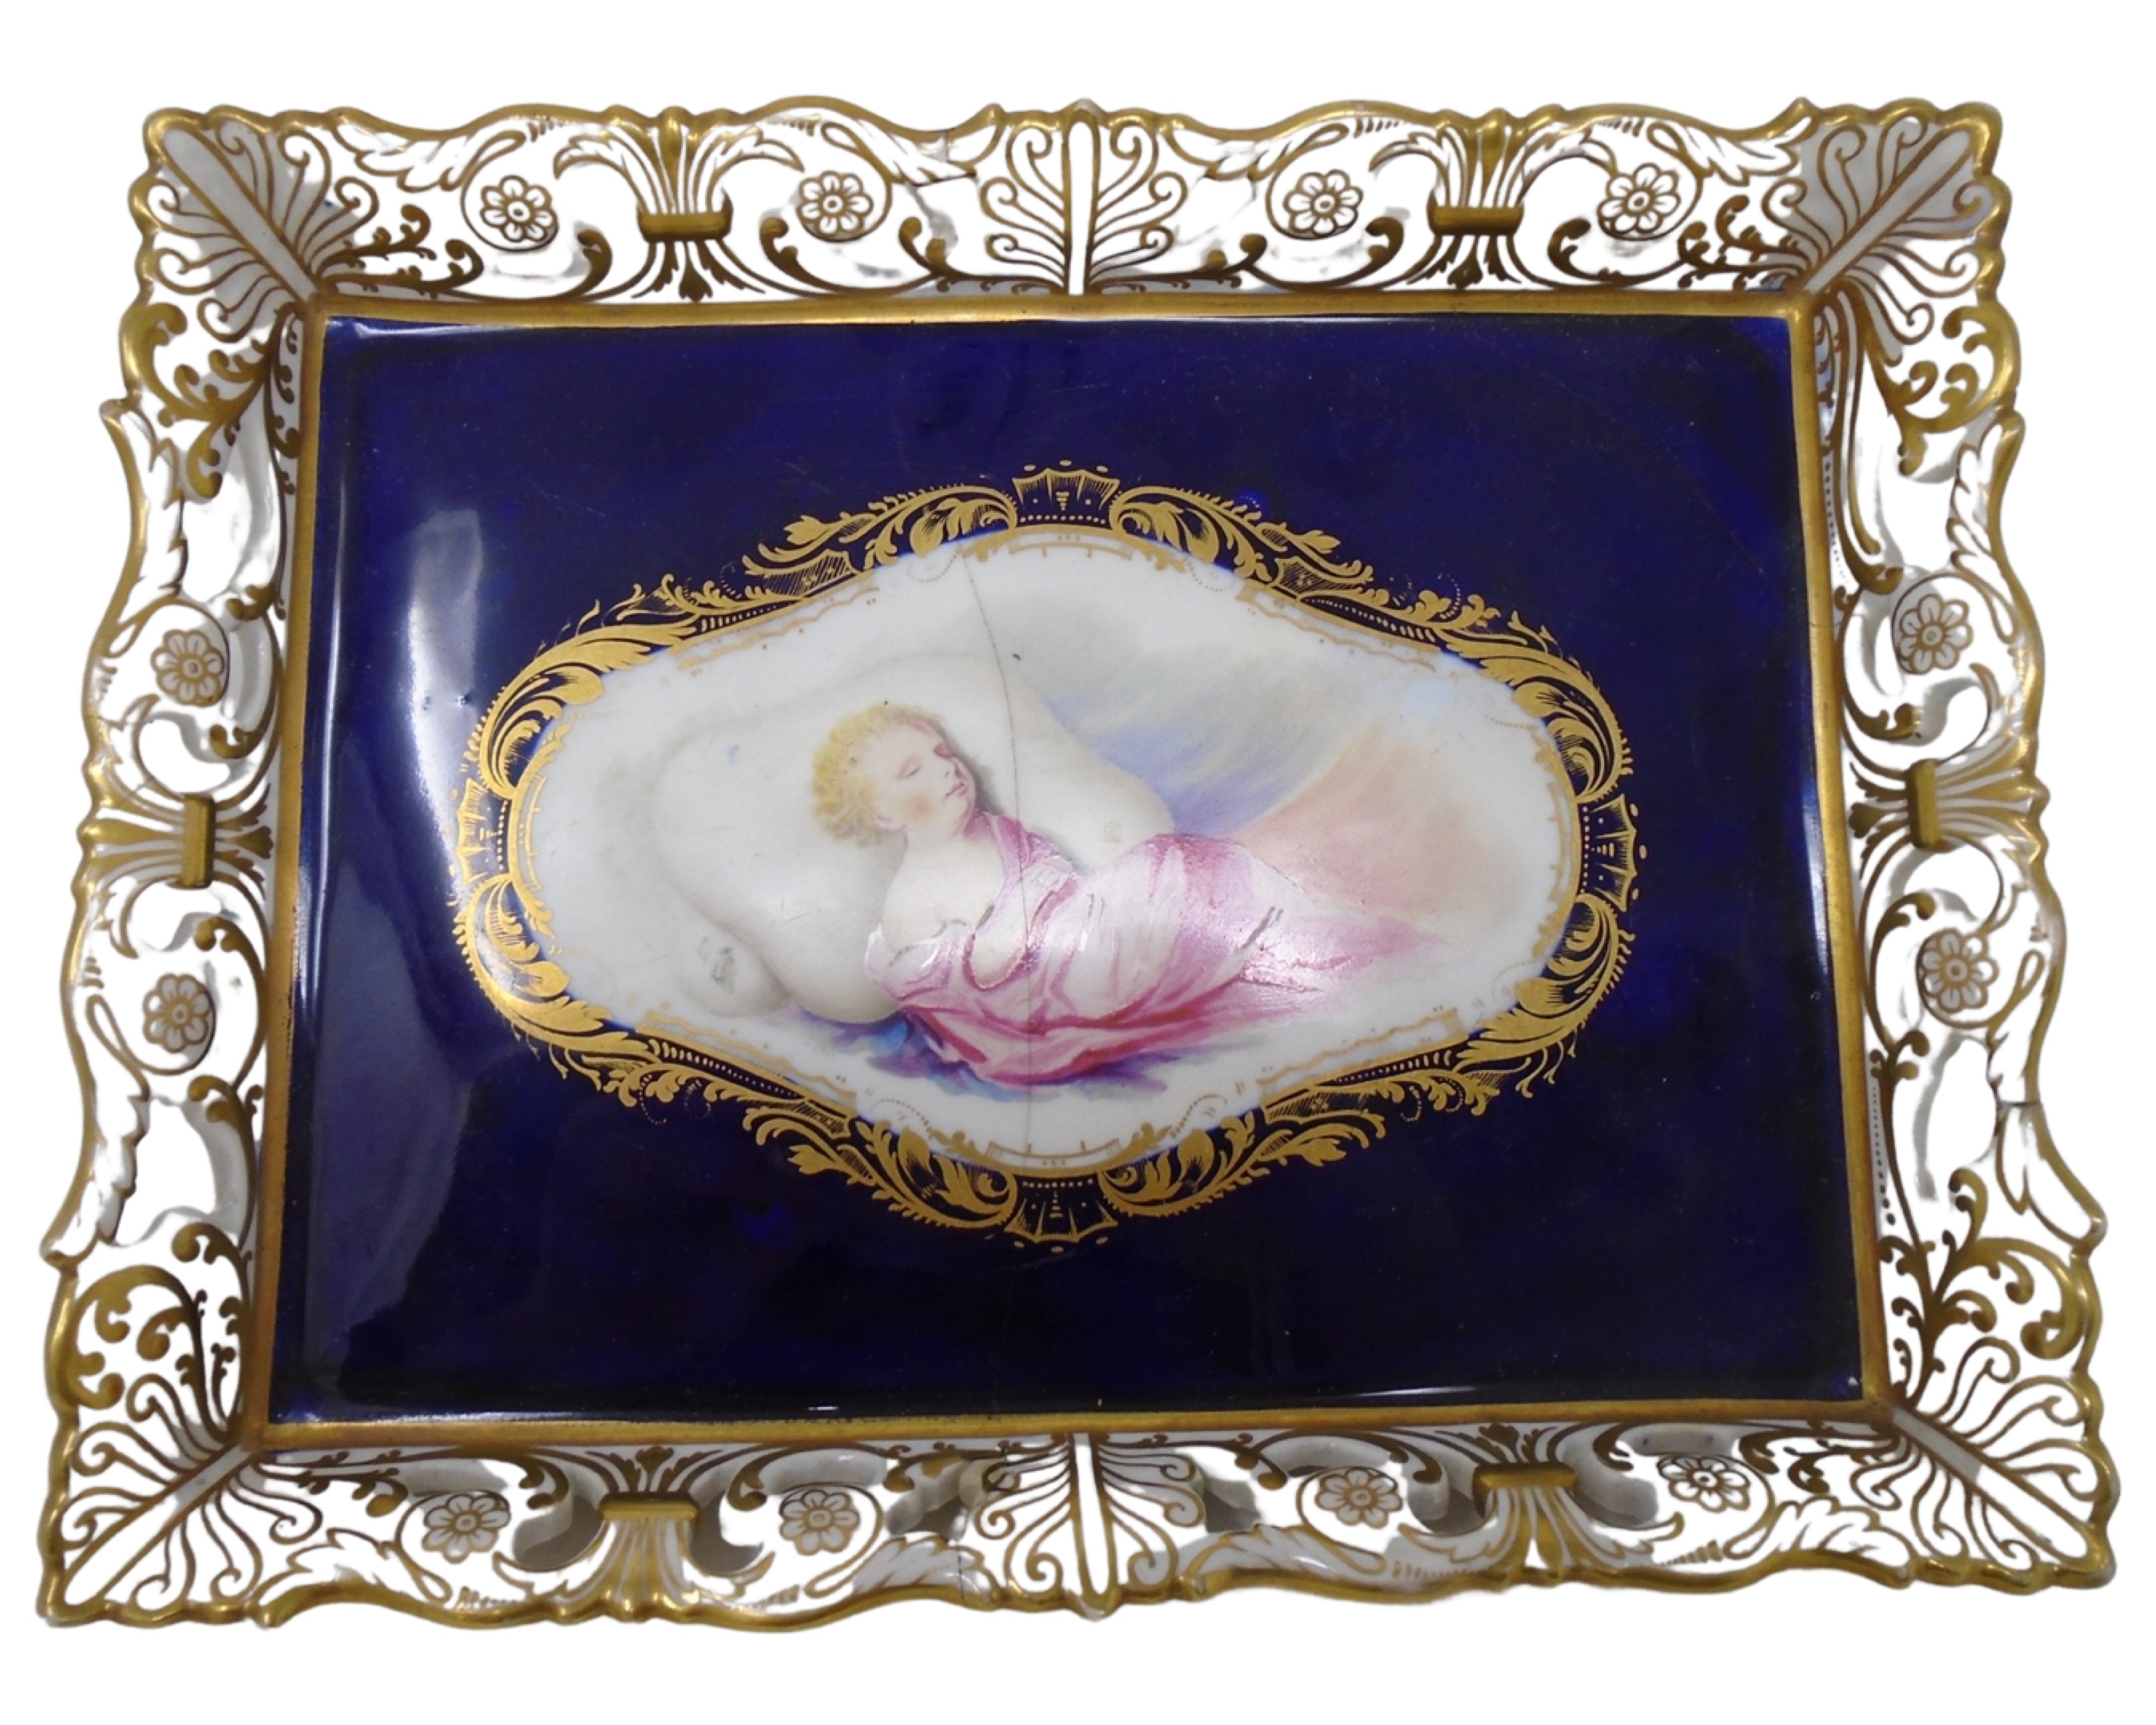 An early 19th century china dish with gallery depicting a sleeping child.